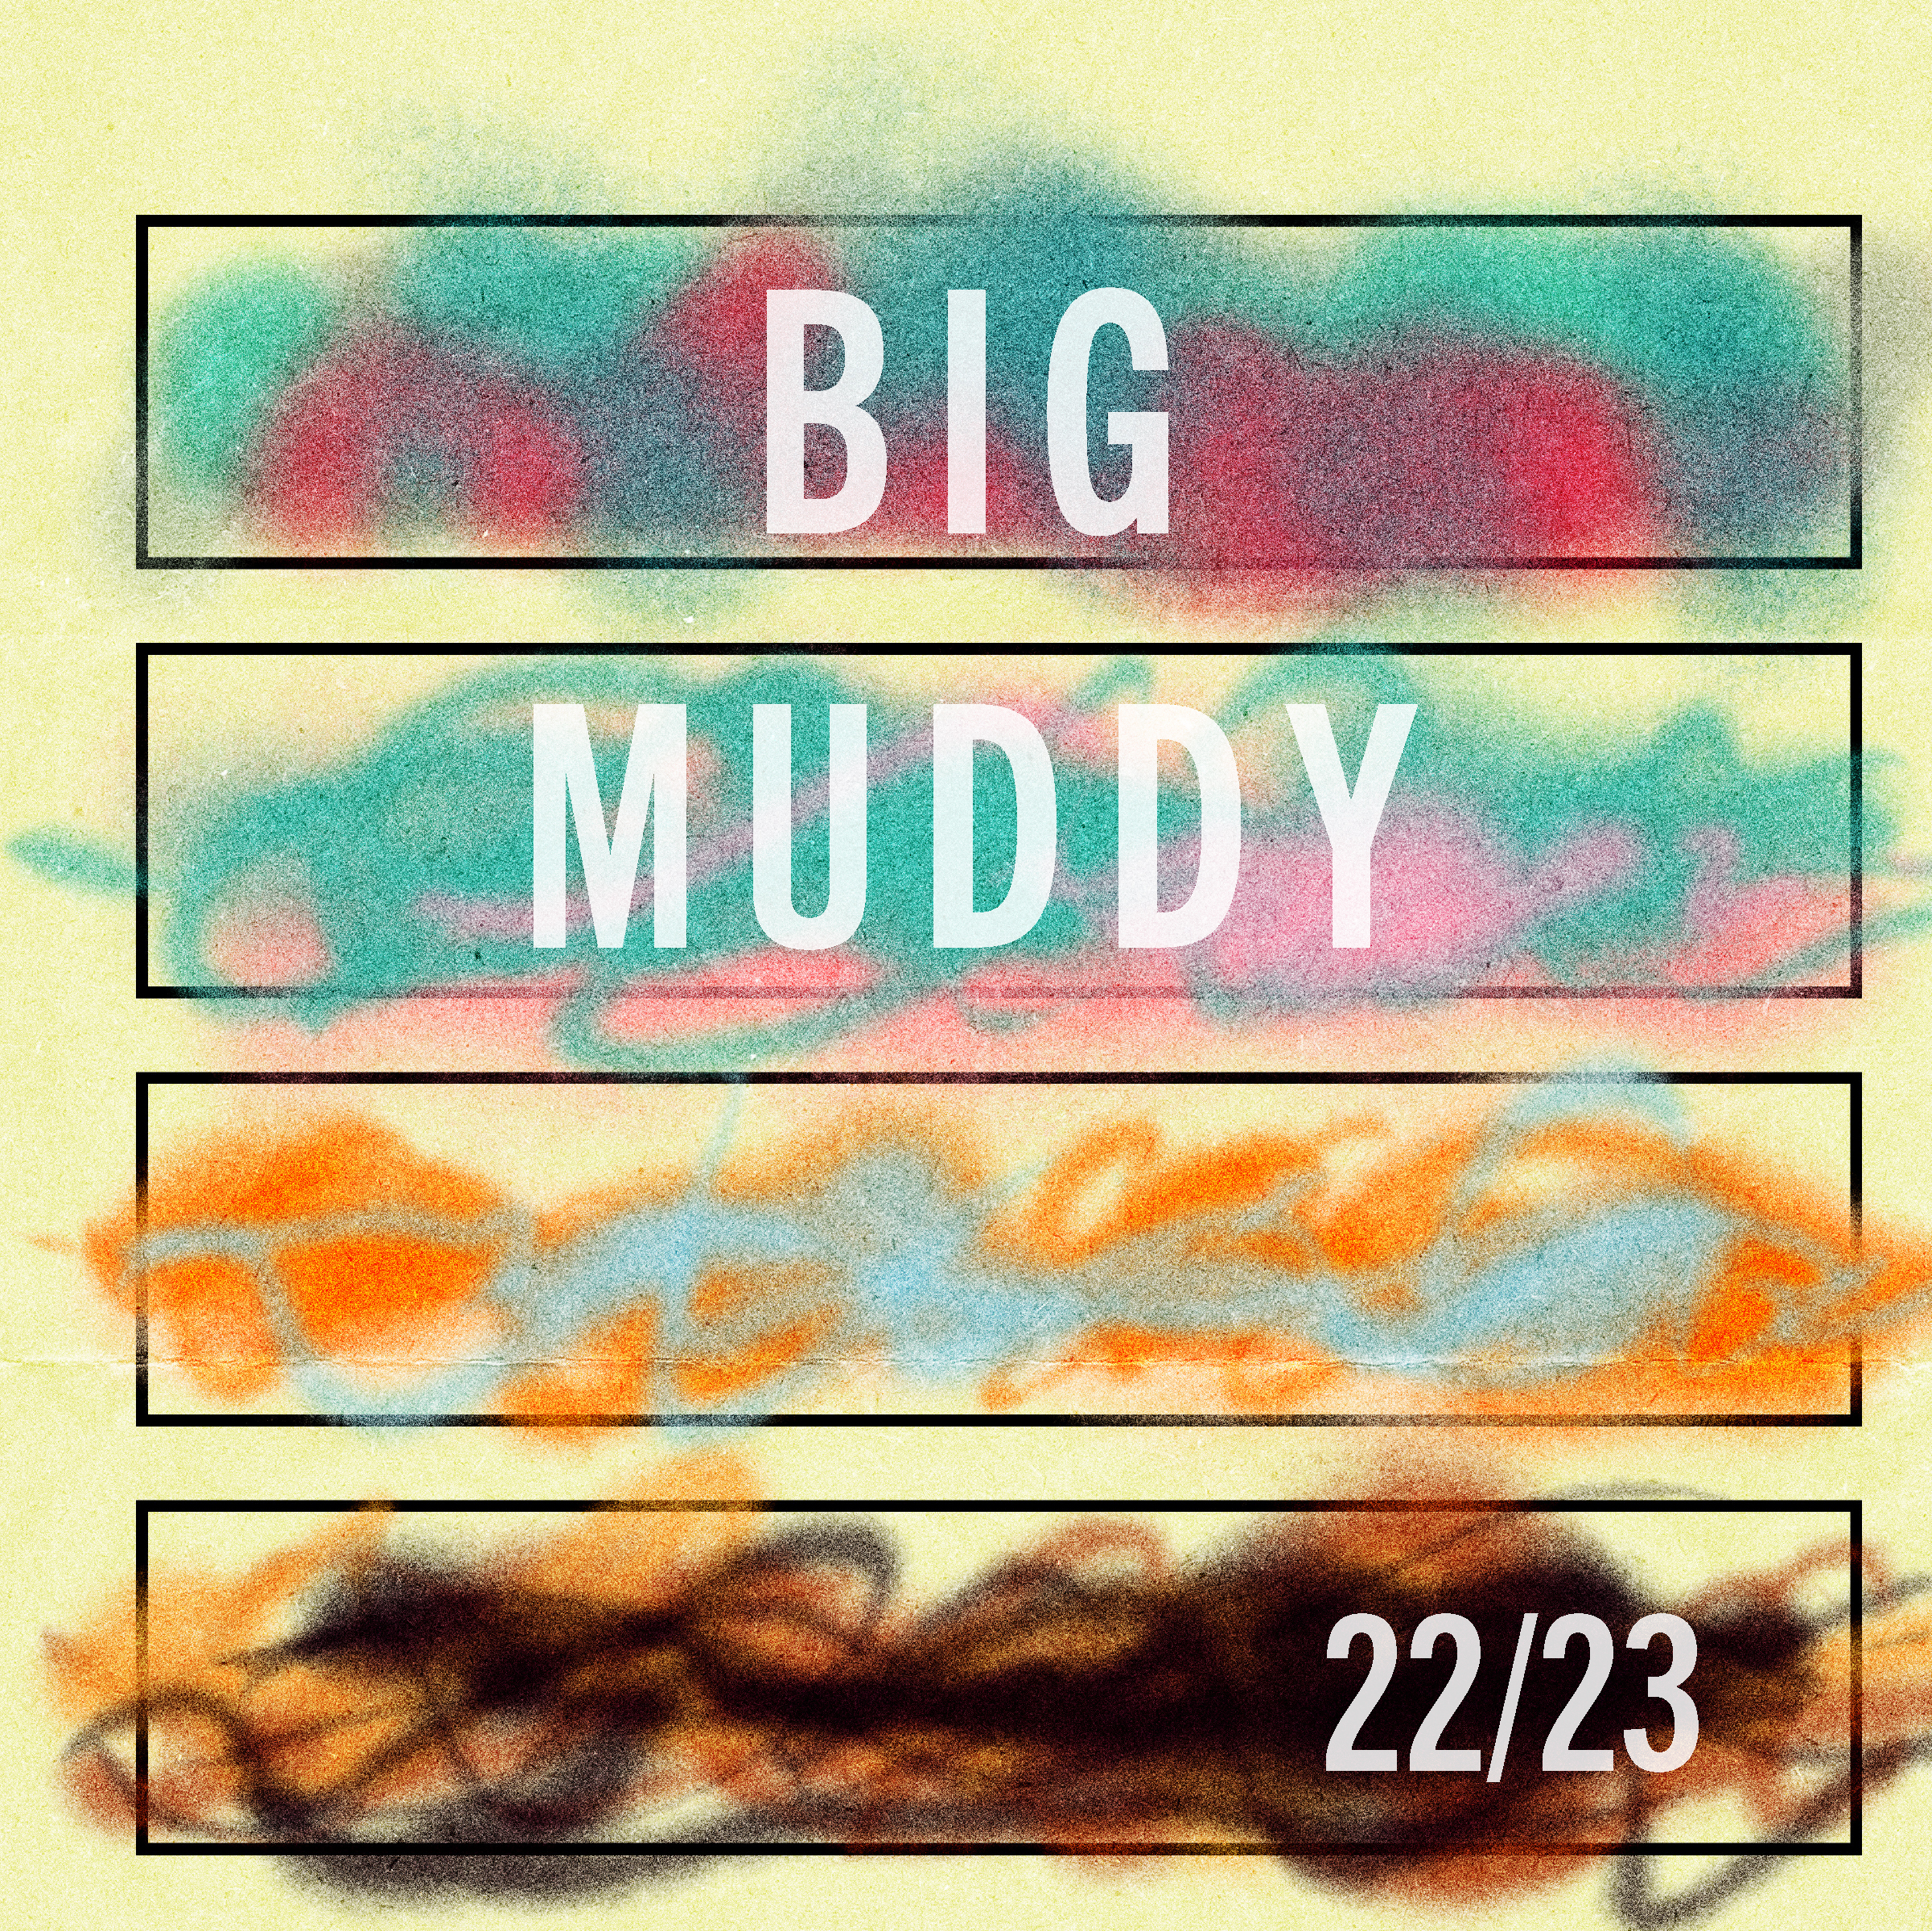 The cover of Big Muddy #22/23. The cover is an abstract with colored lines scribbled over four rectangular boxes against a cream colored background. The name and volume number appear on the cover.